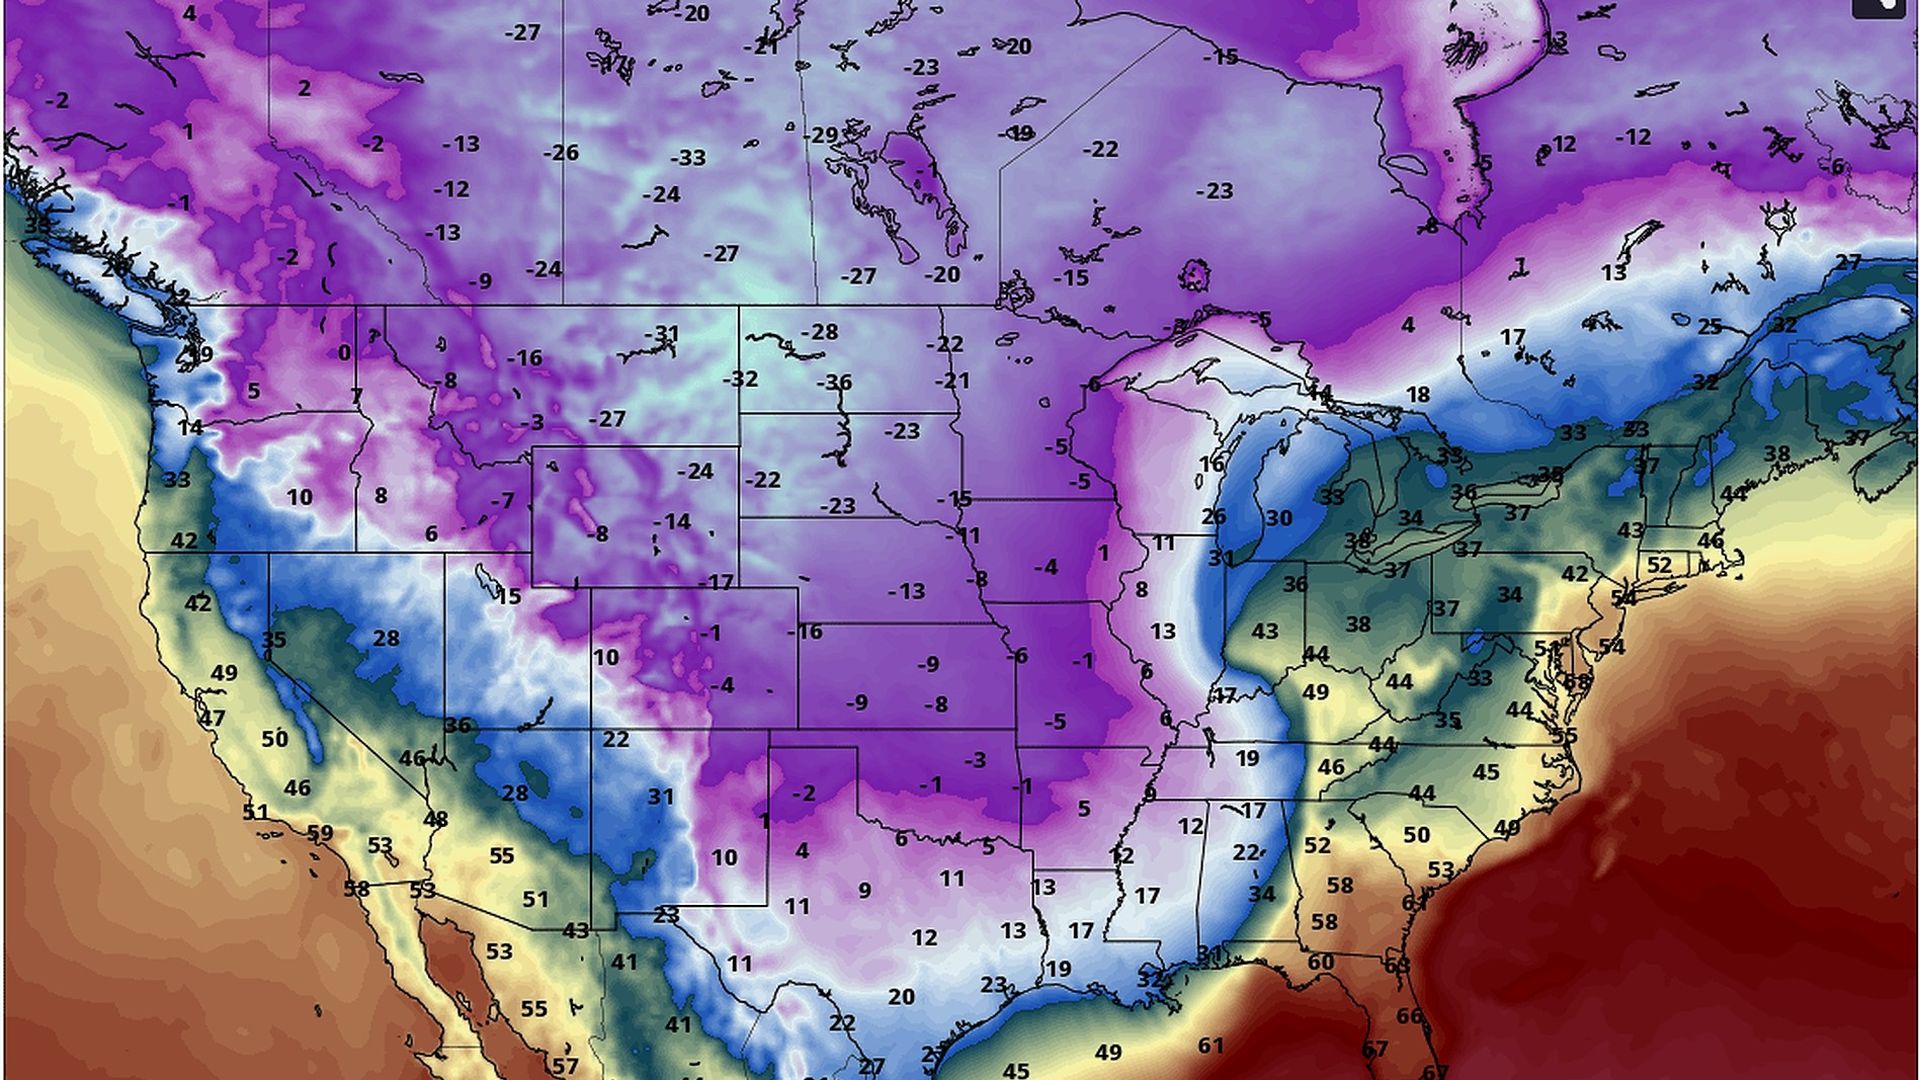  Model projection showing air temperatures on Dec. 23, including single digits down into Texas. 